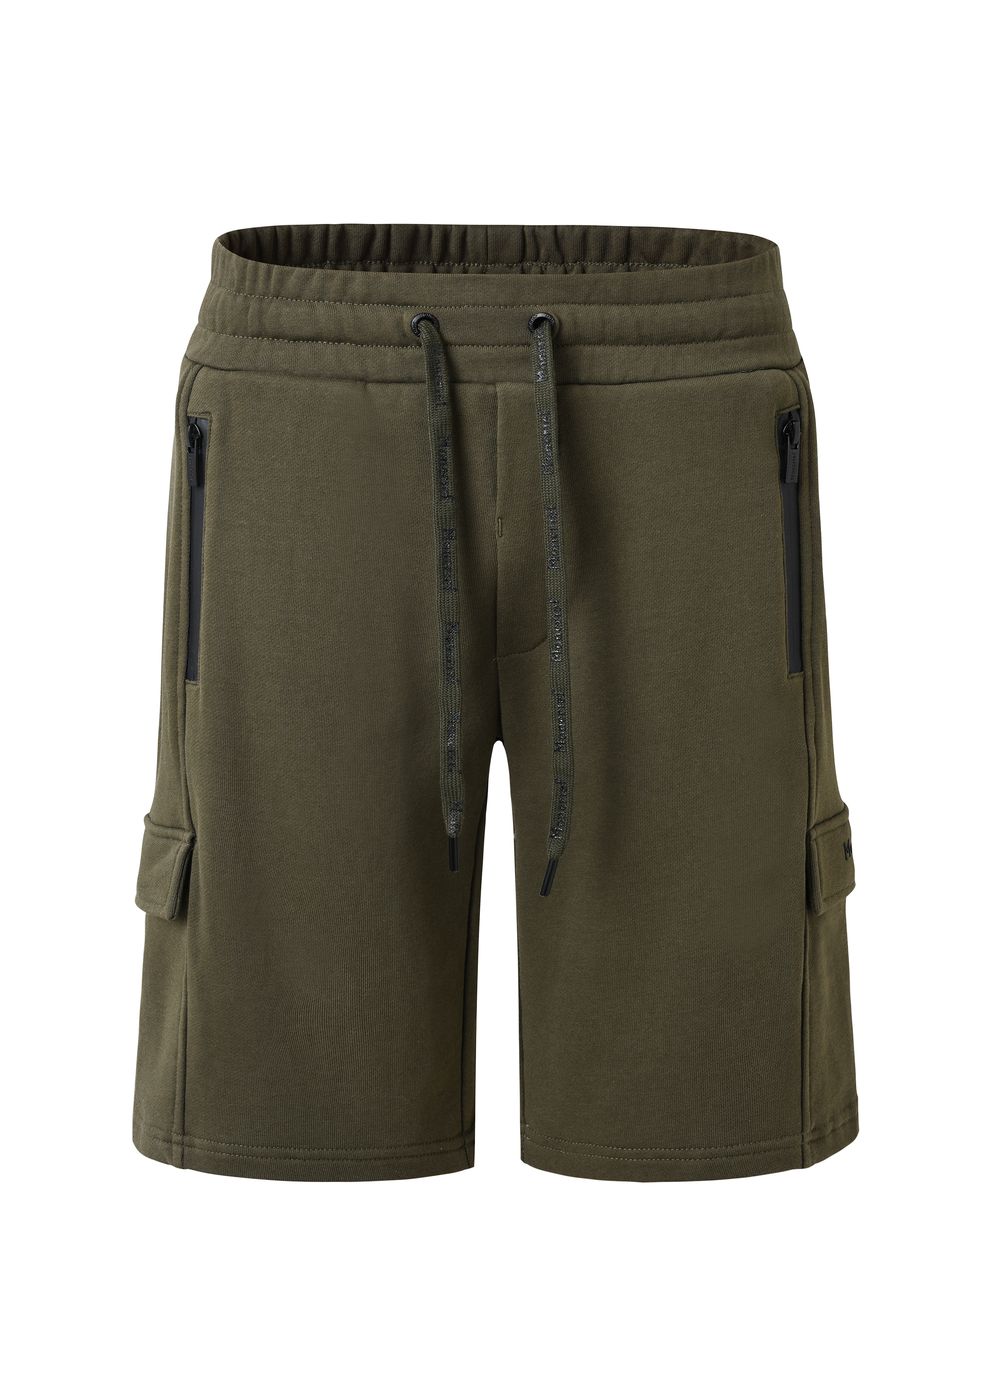 Mens Surplus Division Cargo Shorts Olive Green - Free UK Delivery